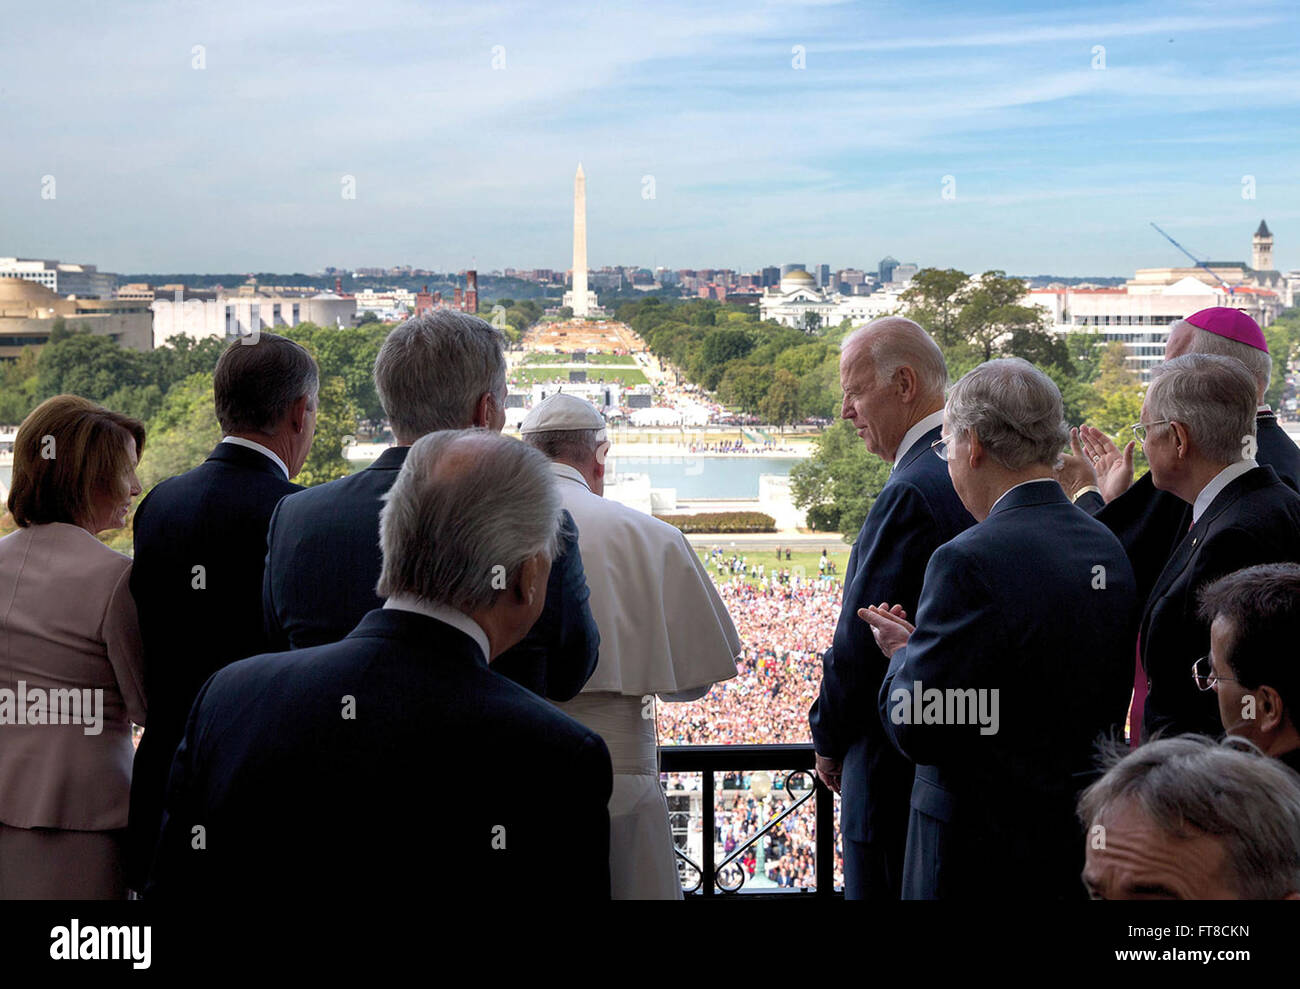 Sept. 24, 2015 “His Holiness Pope Francis, with the Vice President and House Speaker John Boehner and the rest of the Escort Committee, delivers remarks from the Speaker’s balcony following a Joint Session of Congress at the U.S. Capitol.” (Official White House Photo by David Lienemann) Stock Photo